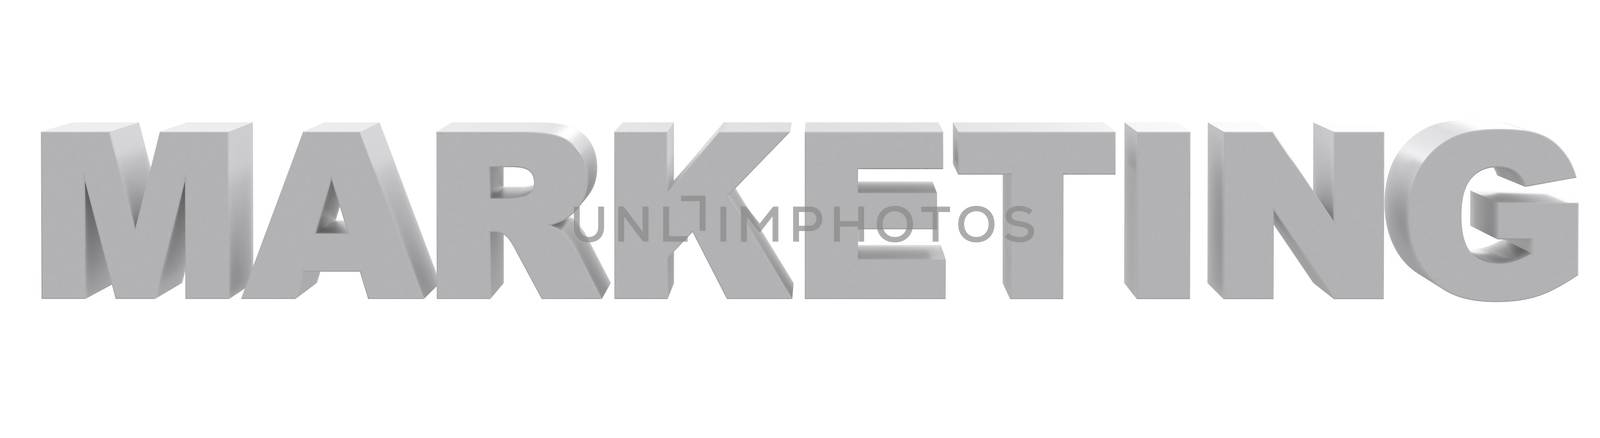 Word marketing on isolated white background, front view